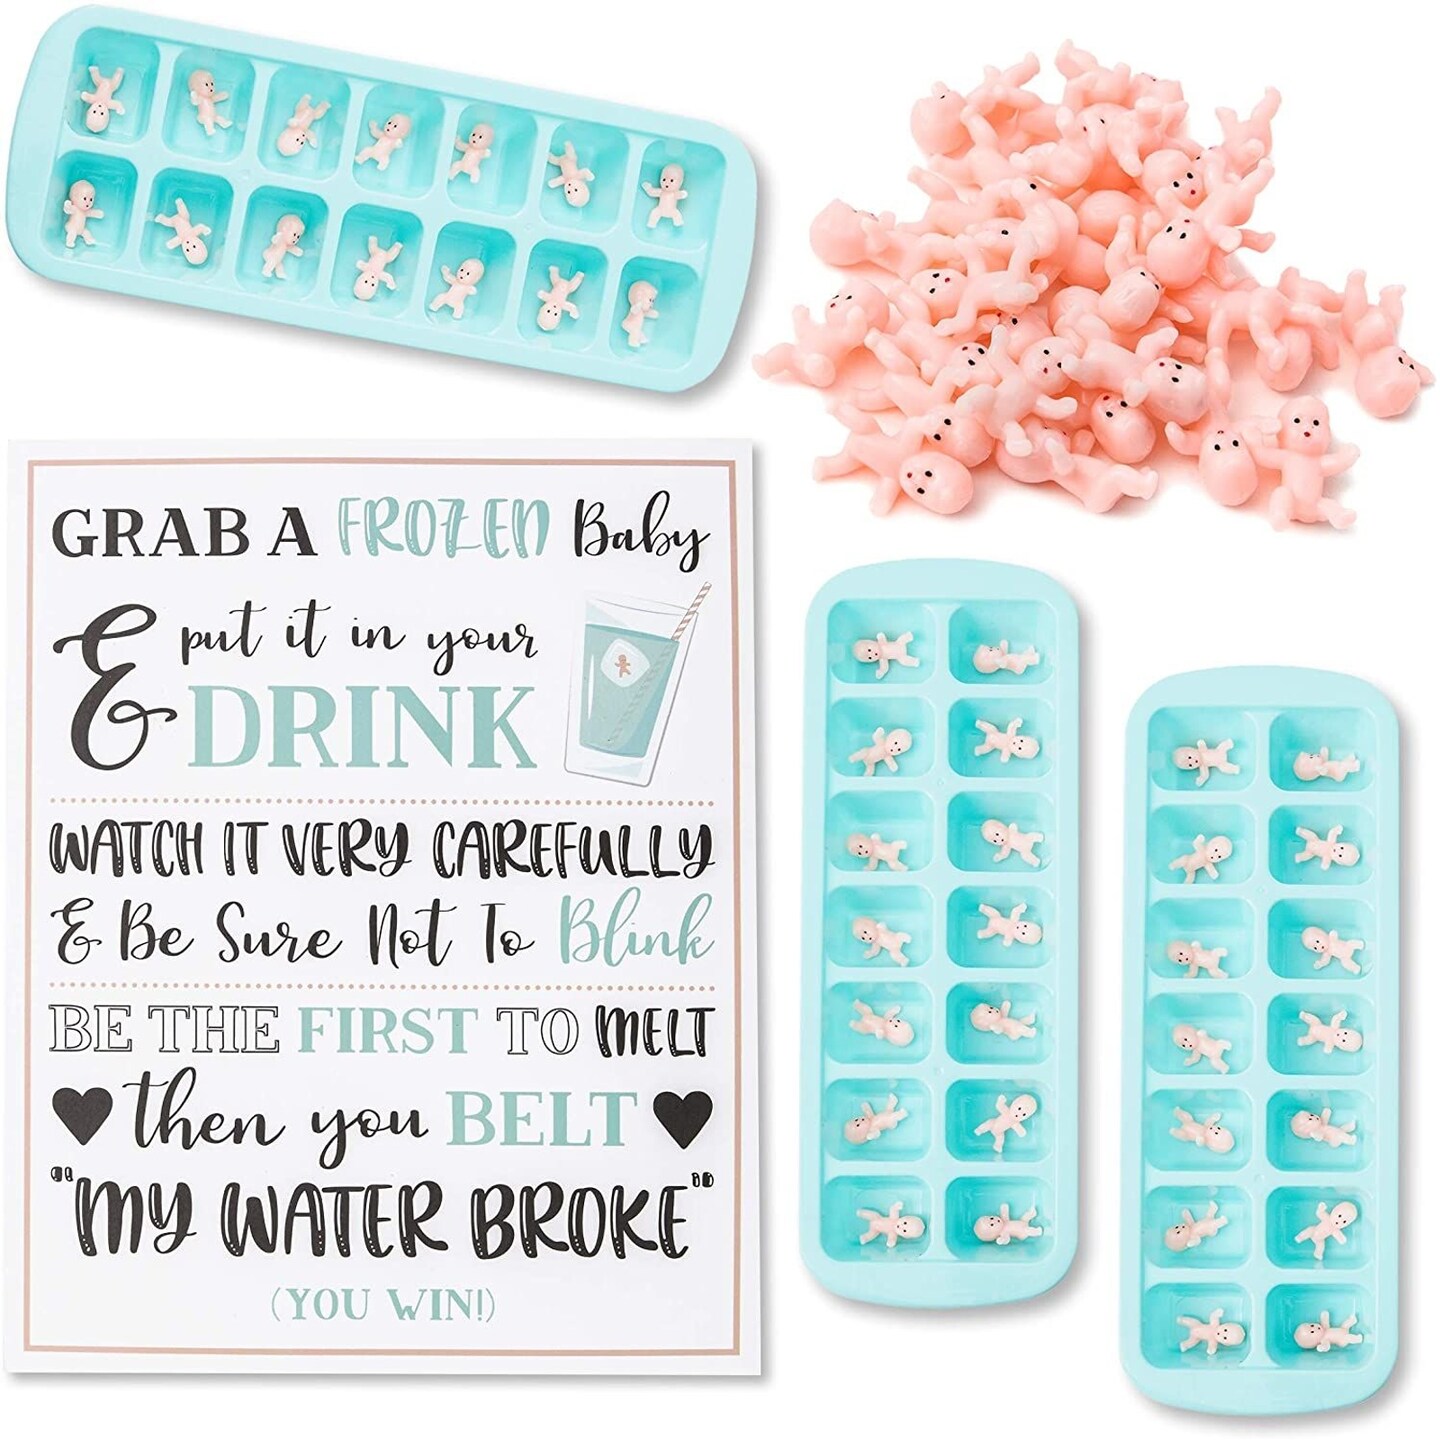 My Water Broke Baby Shower Game with 60 1-Inch Mini Plastic Babies, Girls and Boys, Includes 3 Ice Cube Trays and 1 Sign, for Expecting Mothers and Parents (Turquoise)